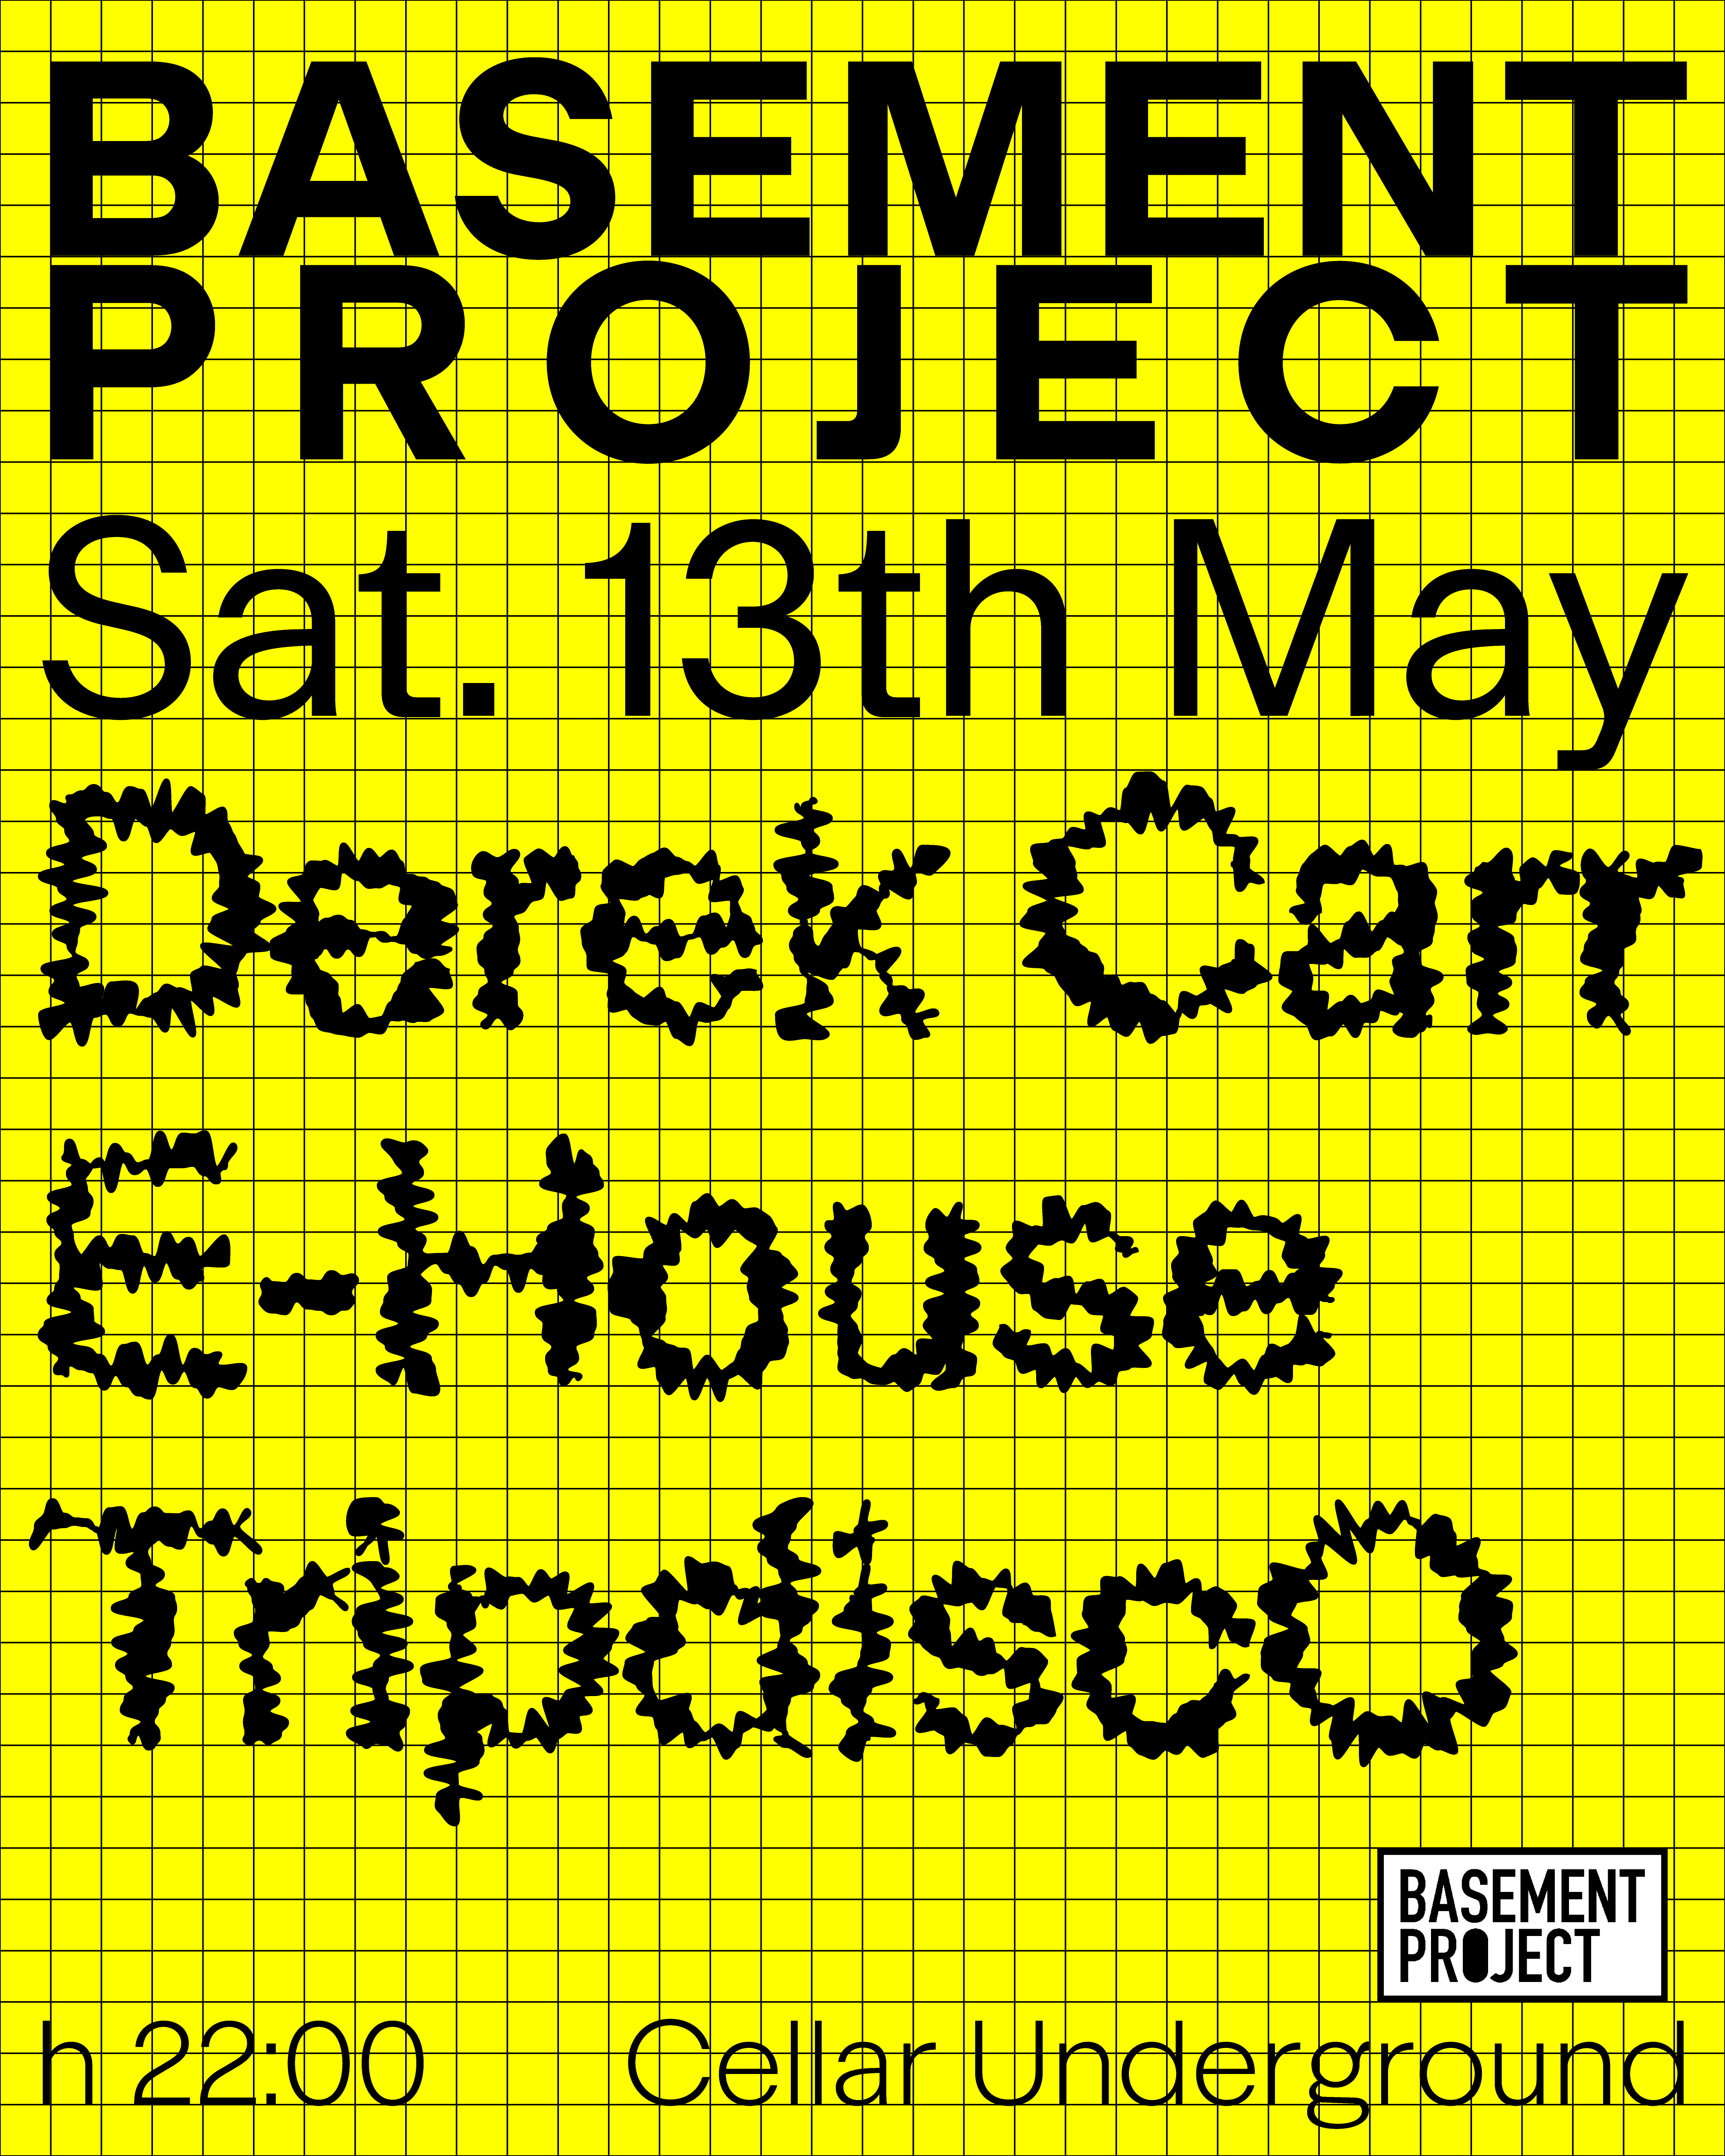 Basement Project with Derek Carr, E-House & TripdiscO - フライヤー表